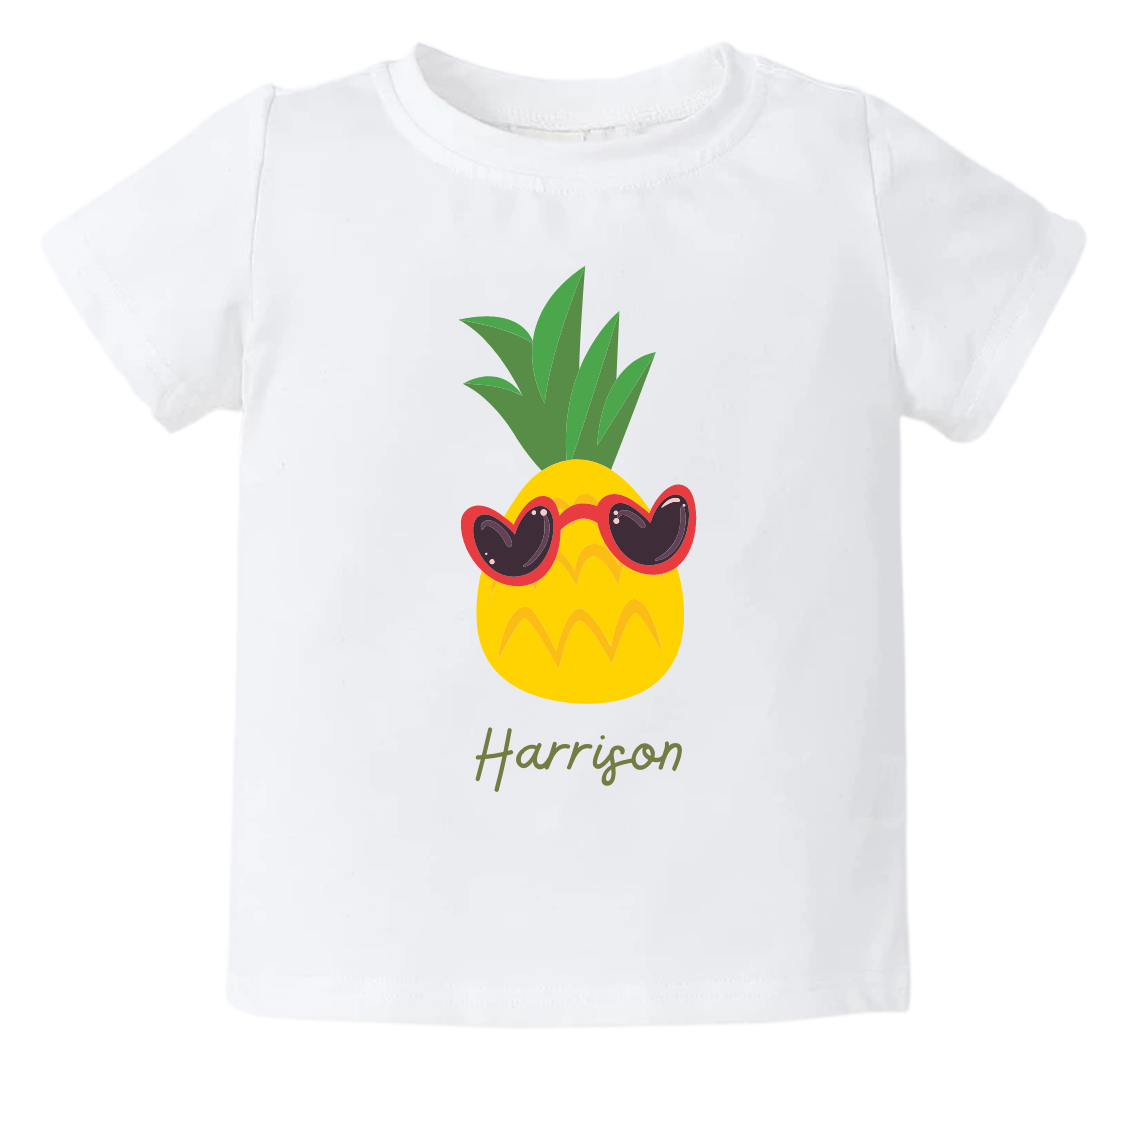 A charming pineapple design on a kid's t-shirt and baby onesie. The design can be personalized with customizable names, adding a touch of tropical vibes to the outfit for sunny days and cute moments.